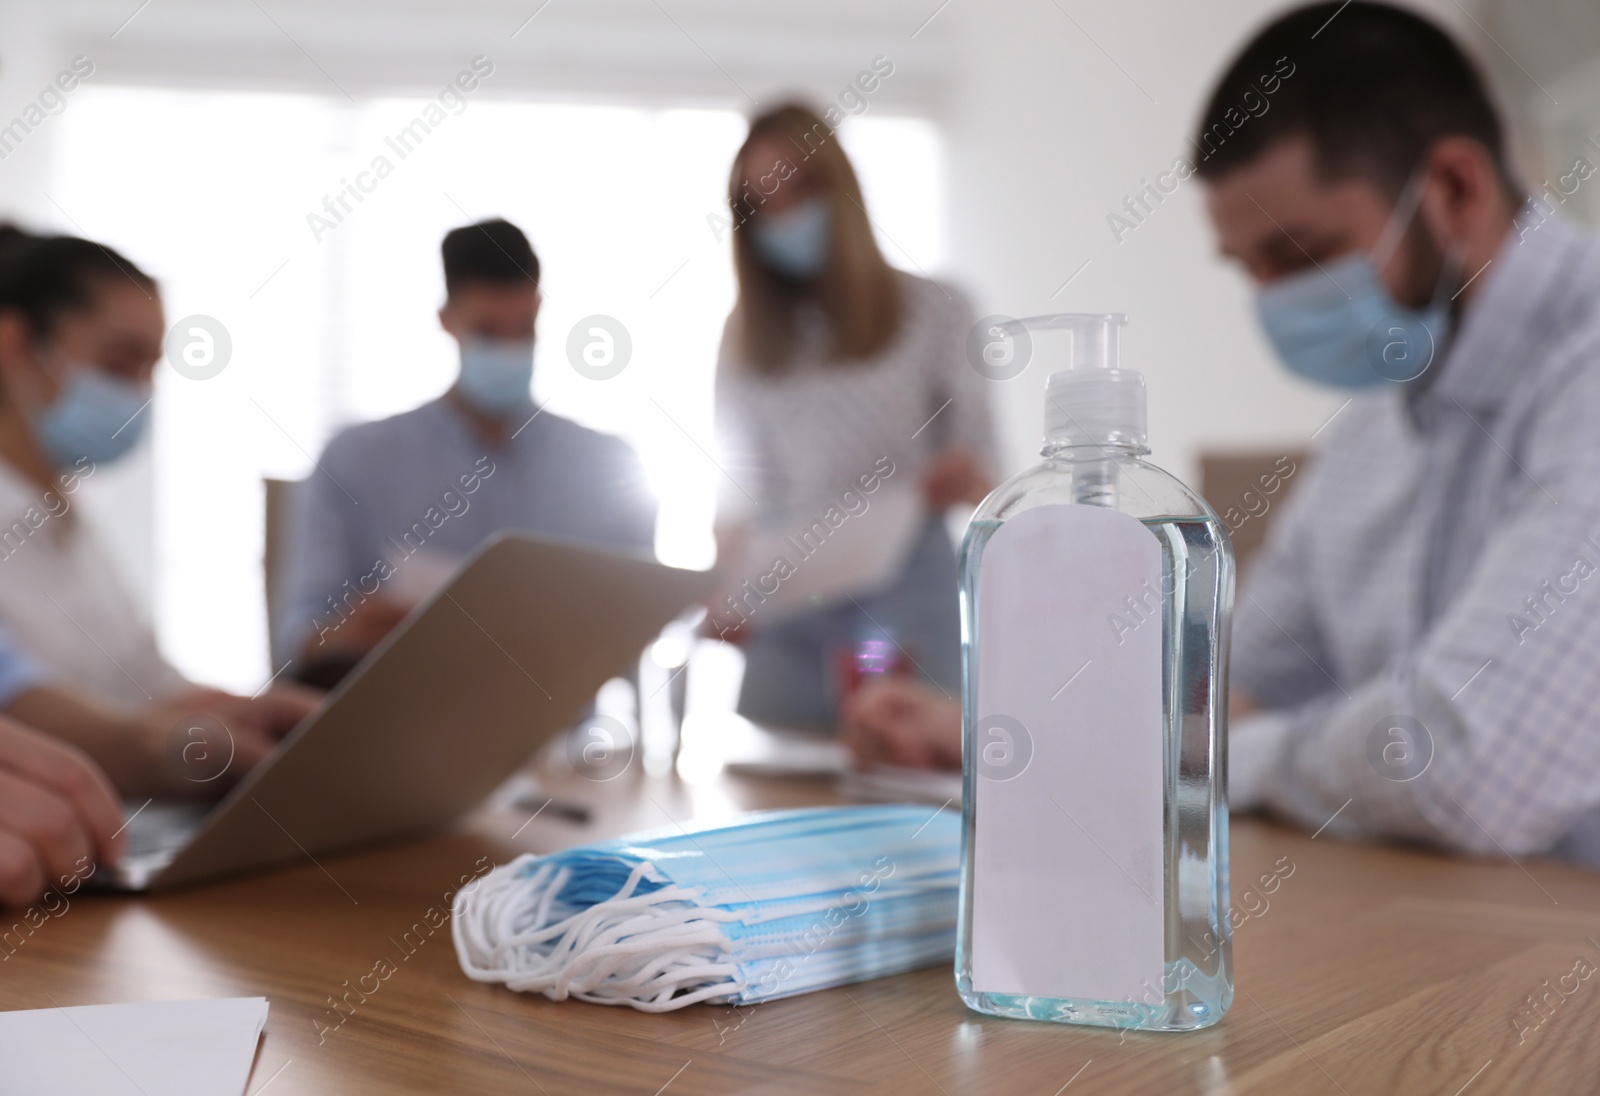 Photo of Protective masks, hand sanitizer and blurred view of coworkers on background. Business meeting during COVID-19 pandemic